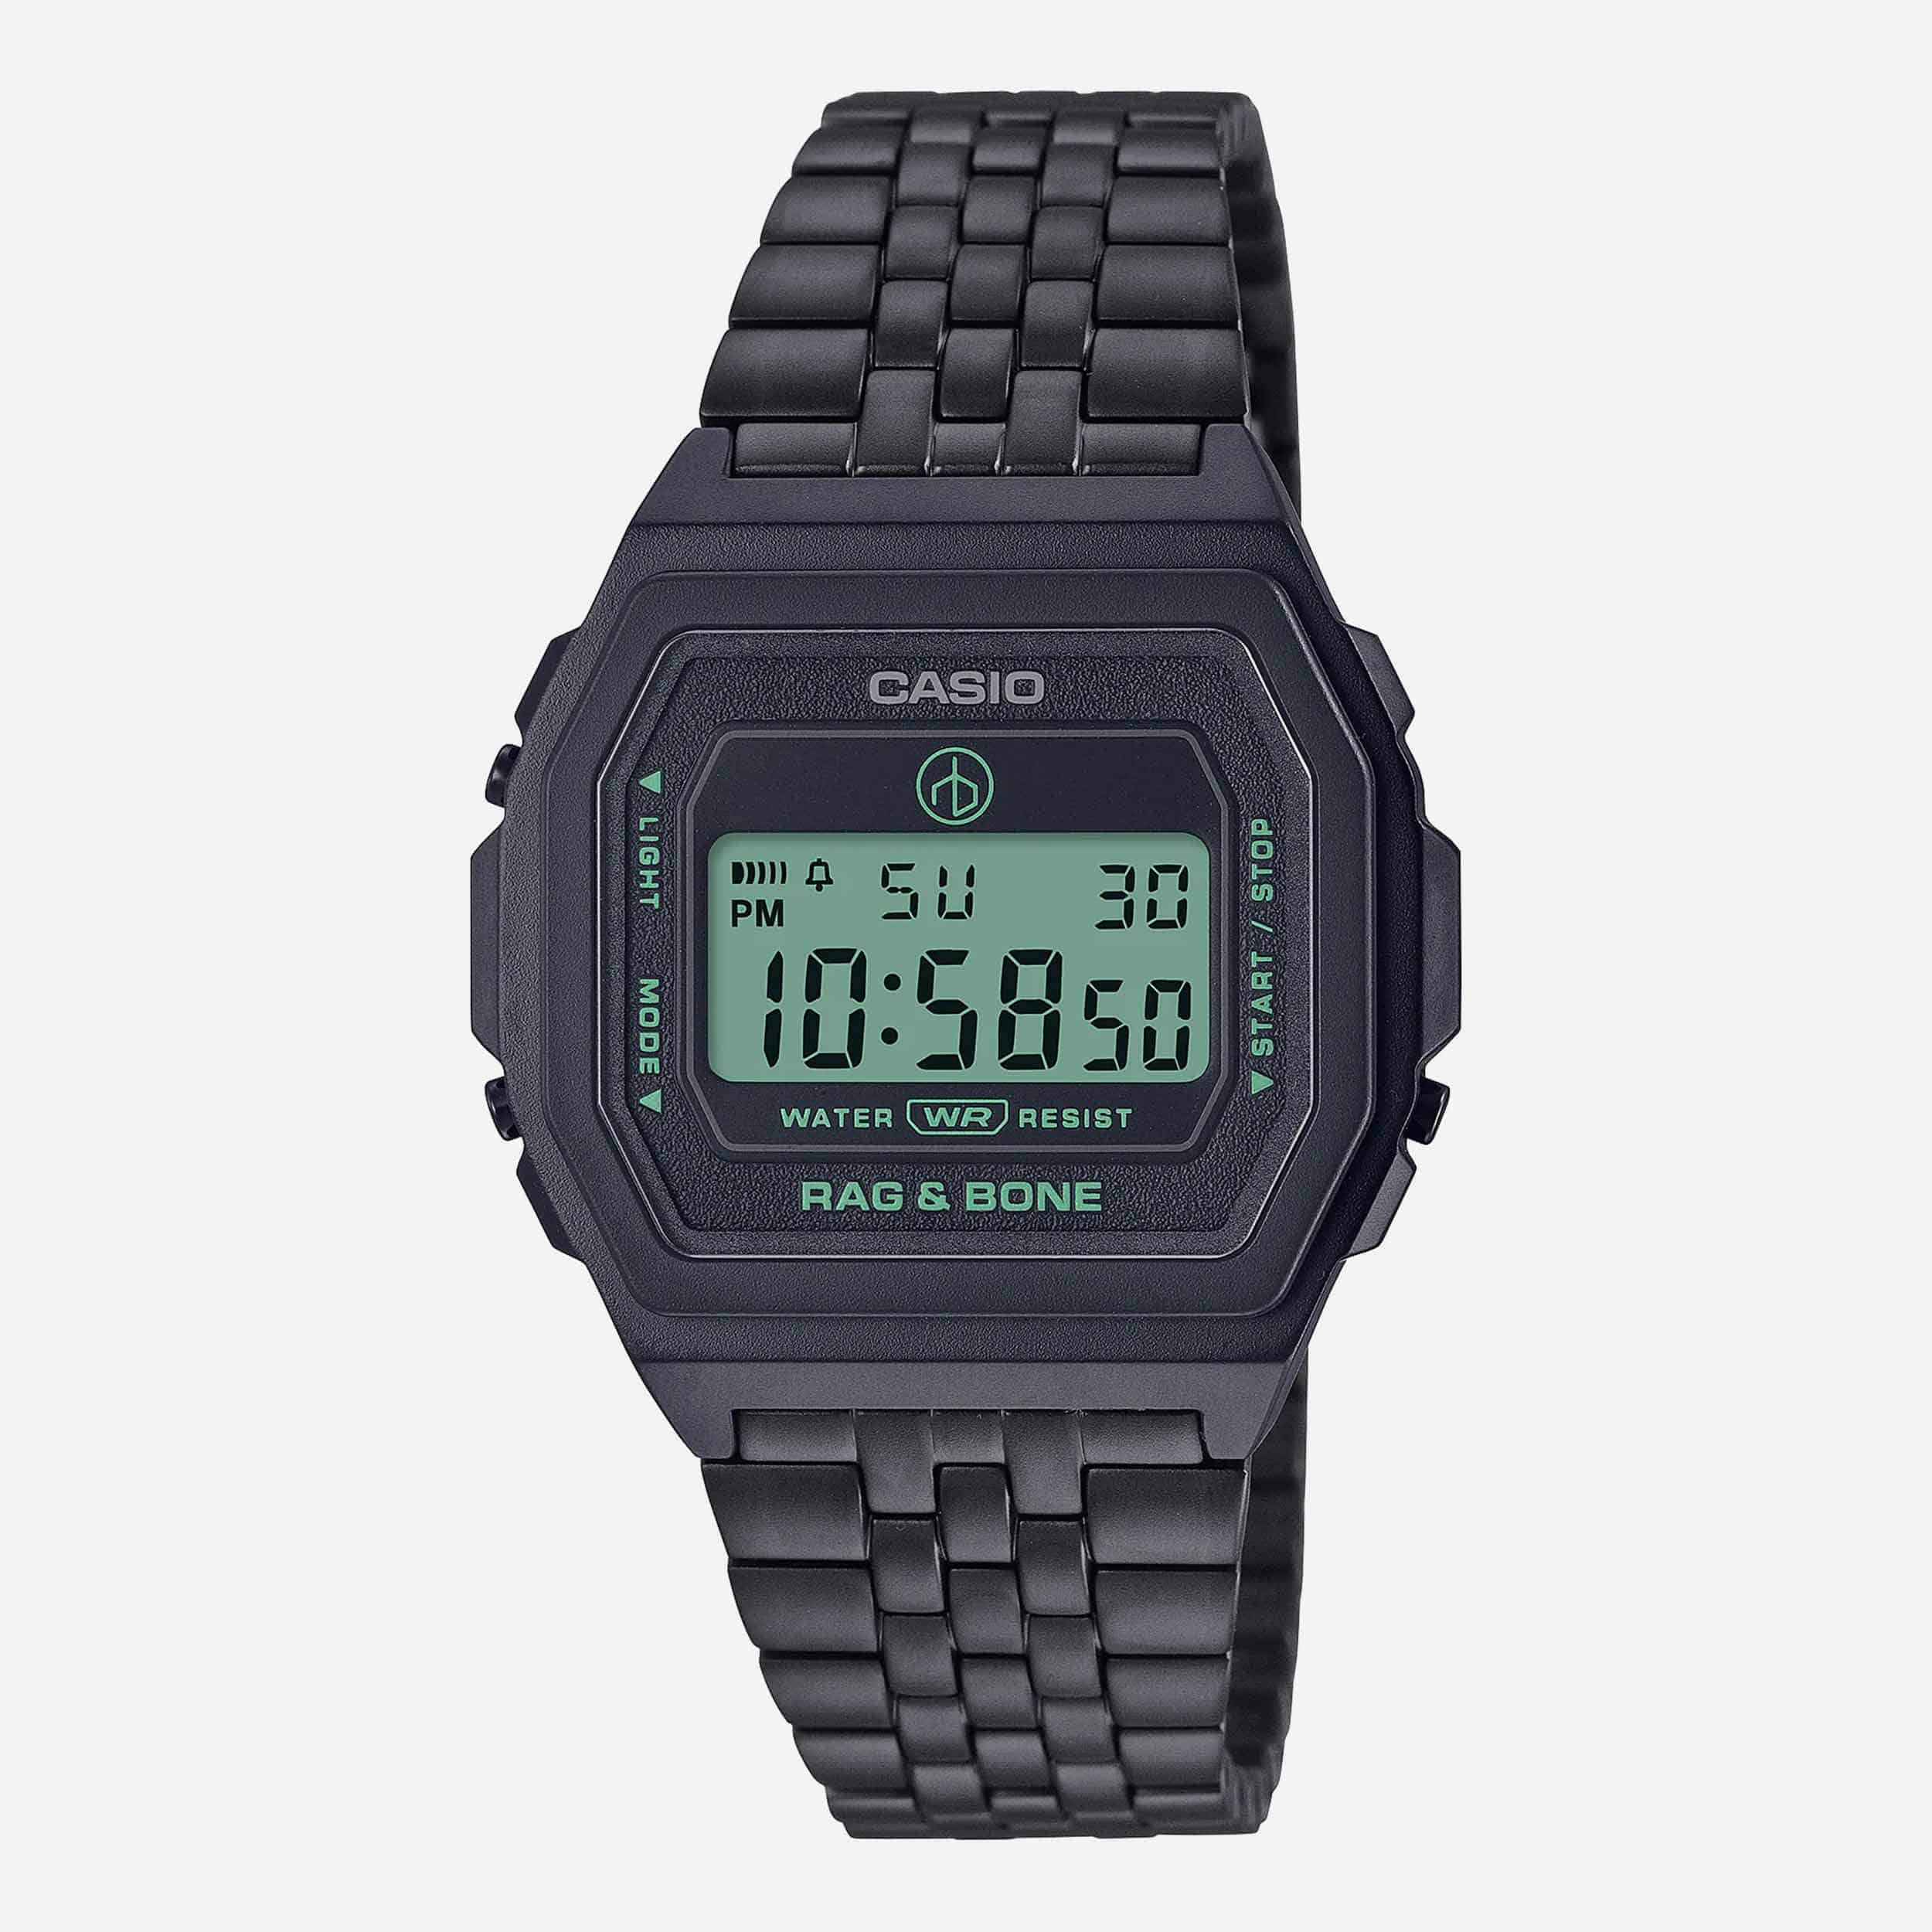 Casio Teams Up With Rag & Bone to Celebrate the Apparel Brand’s 20th Anniversary